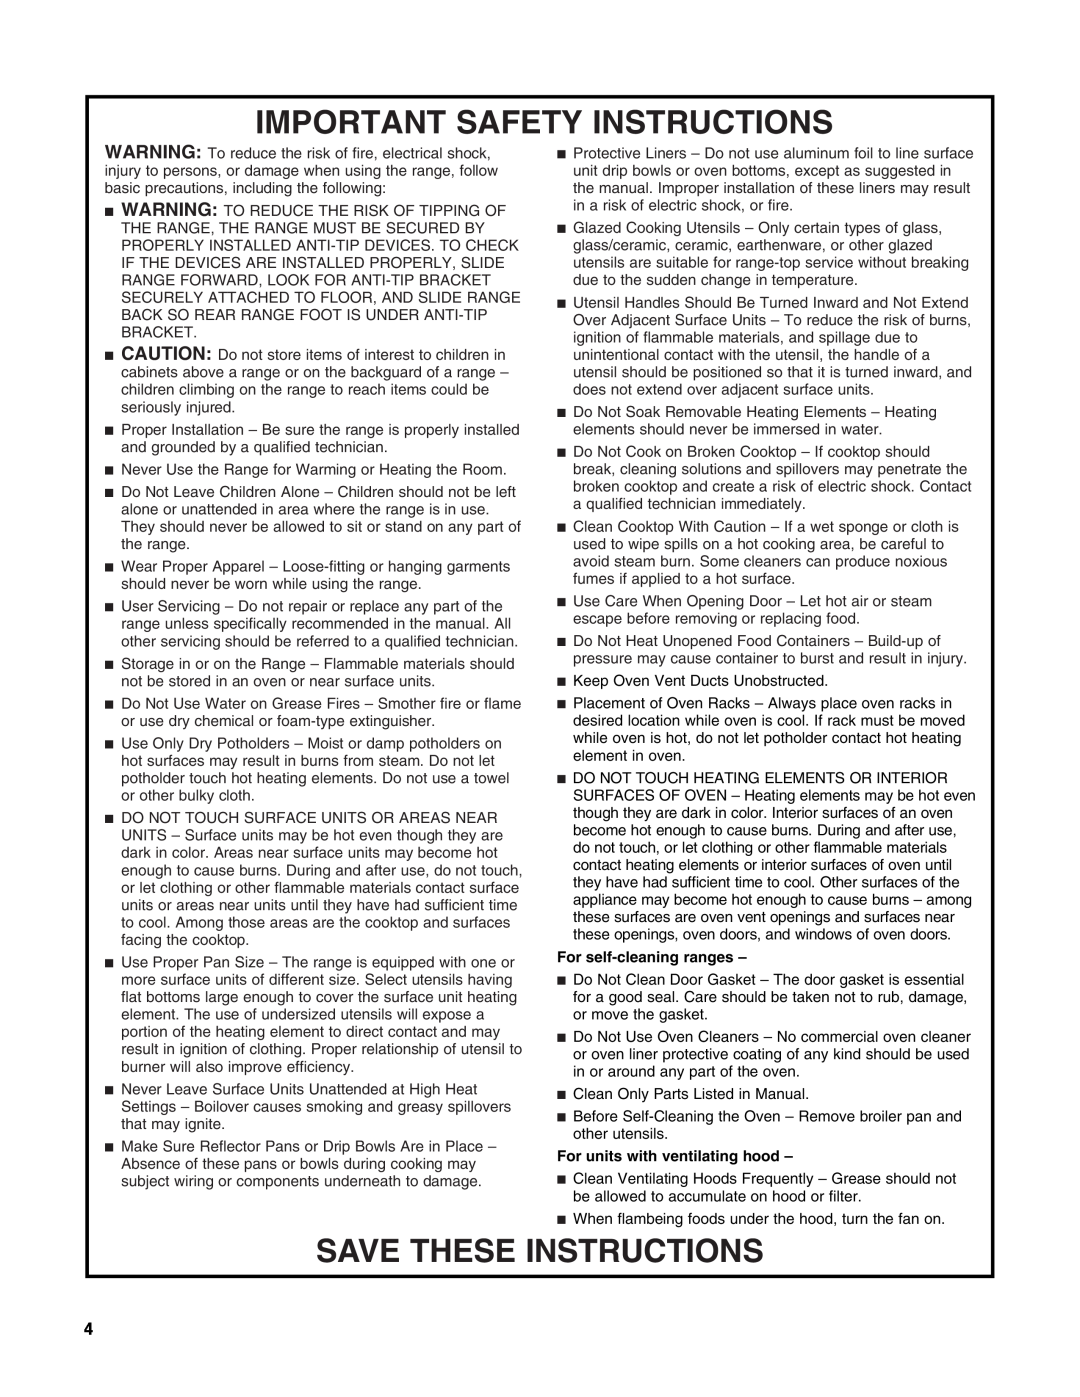 Whirlpool W10162205A manual Important Safety Instructions, Save These Instructions, For self-cleaningranges 